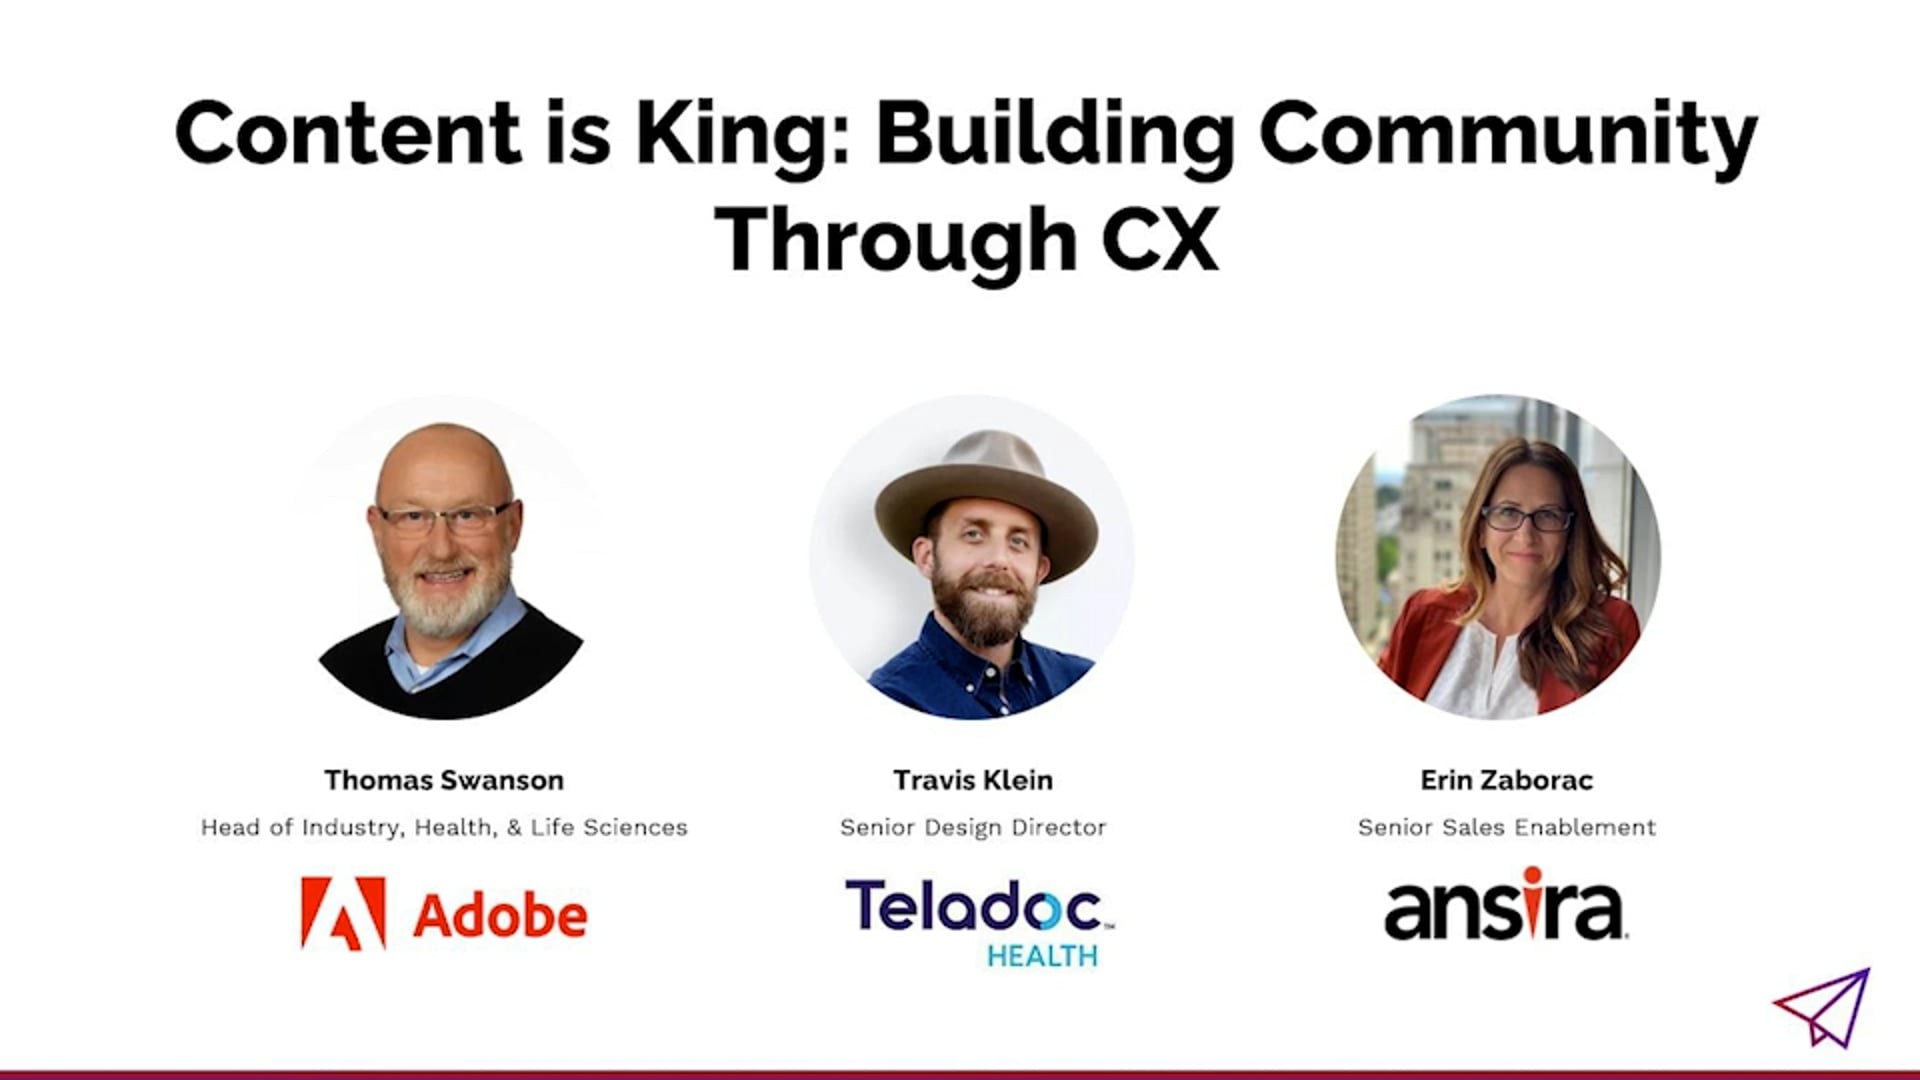 Content is King: Building Community through CX